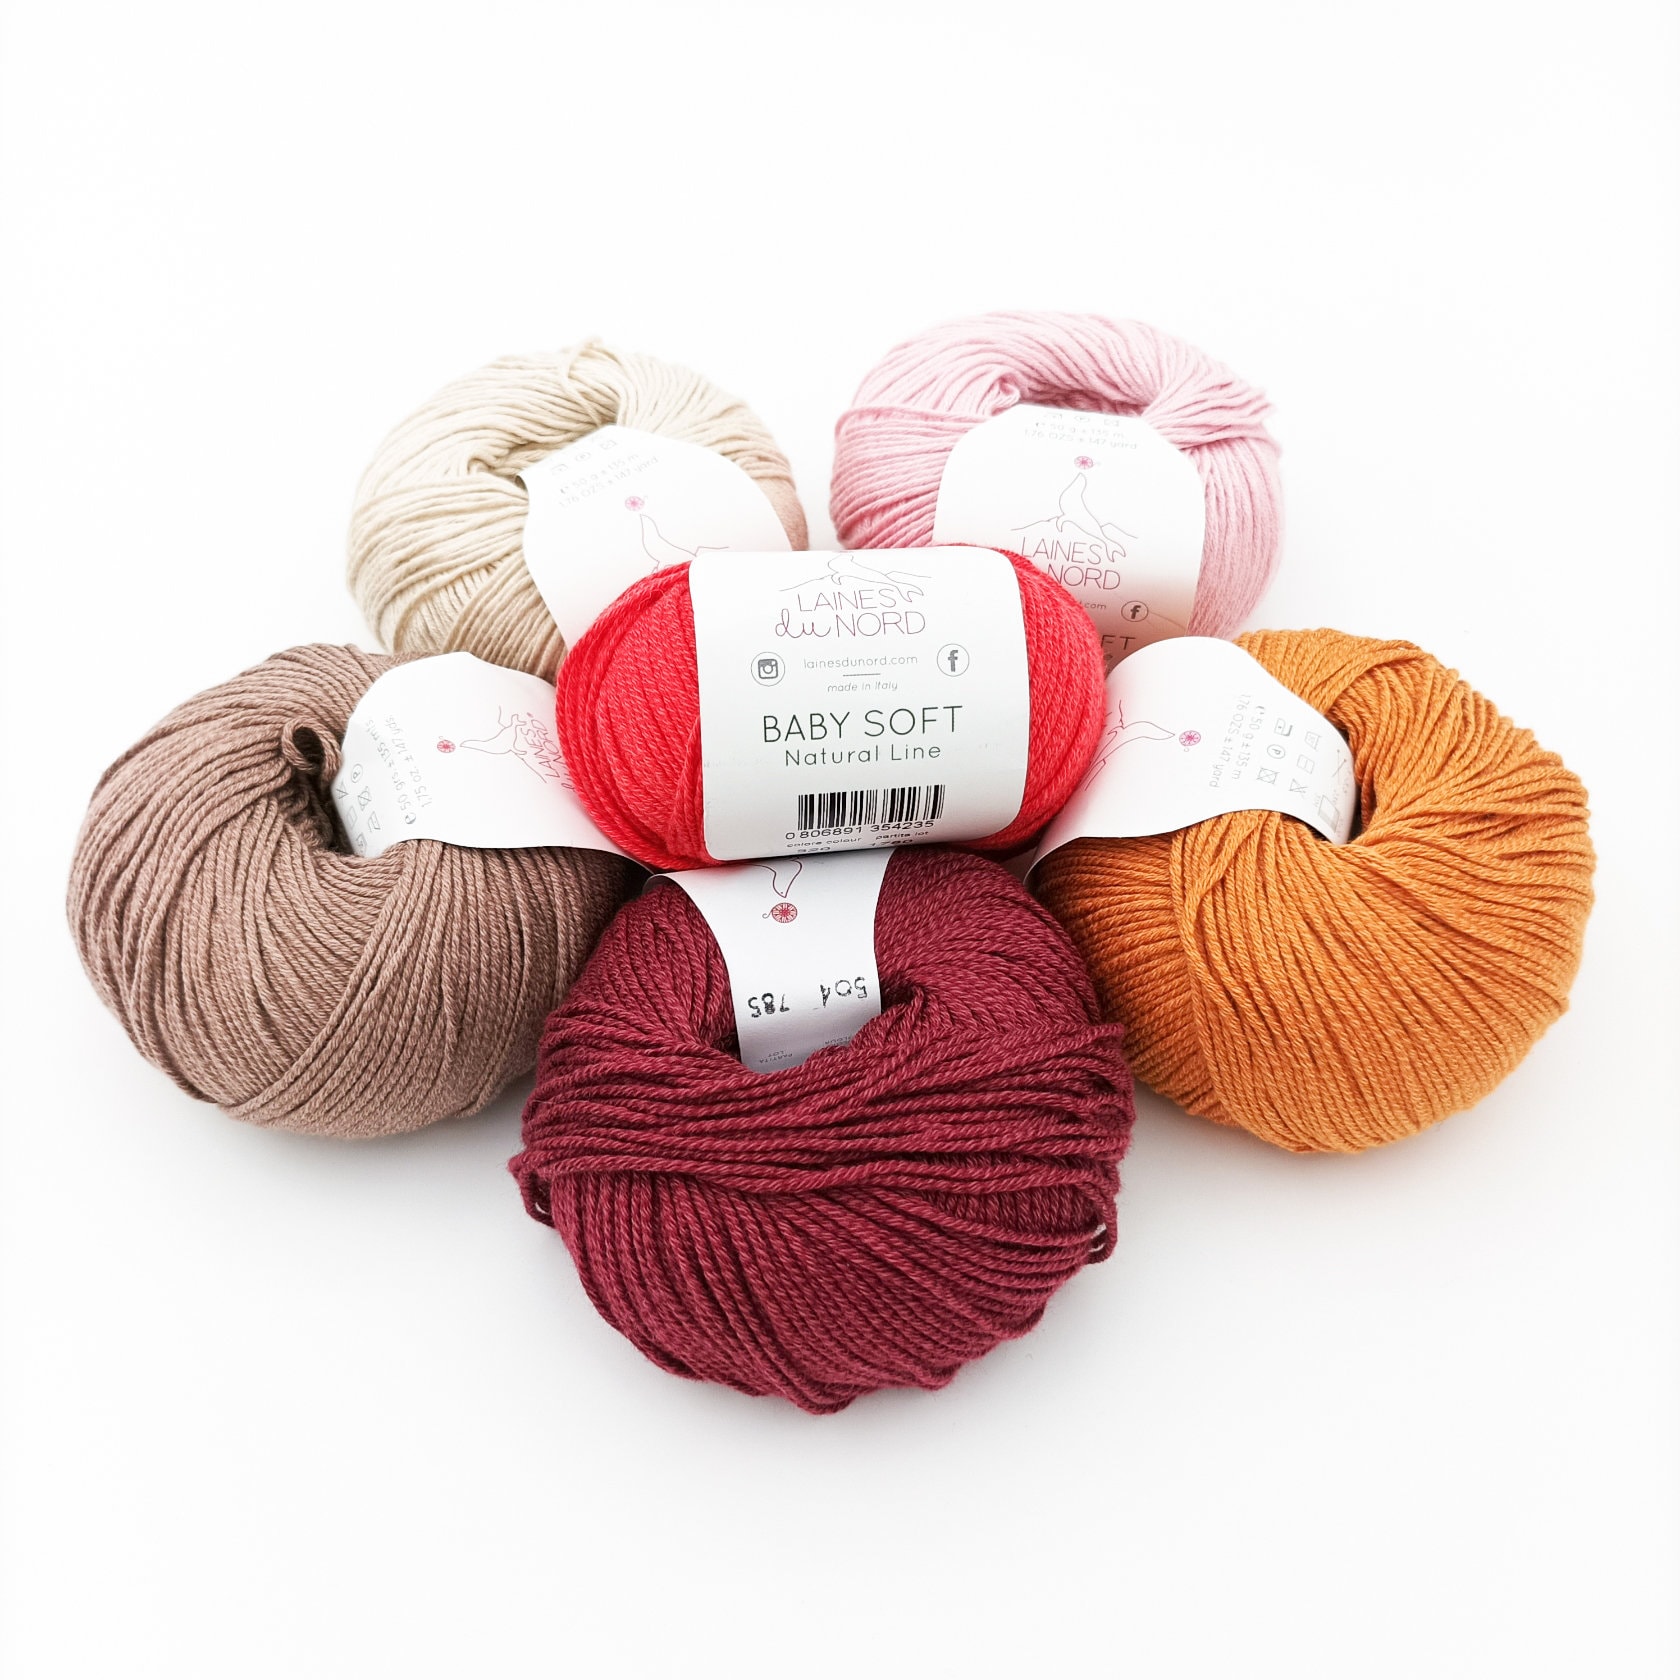 Laines Du Nord Baby Soft Yarn: Your Natural Choice for Soft -  Norway